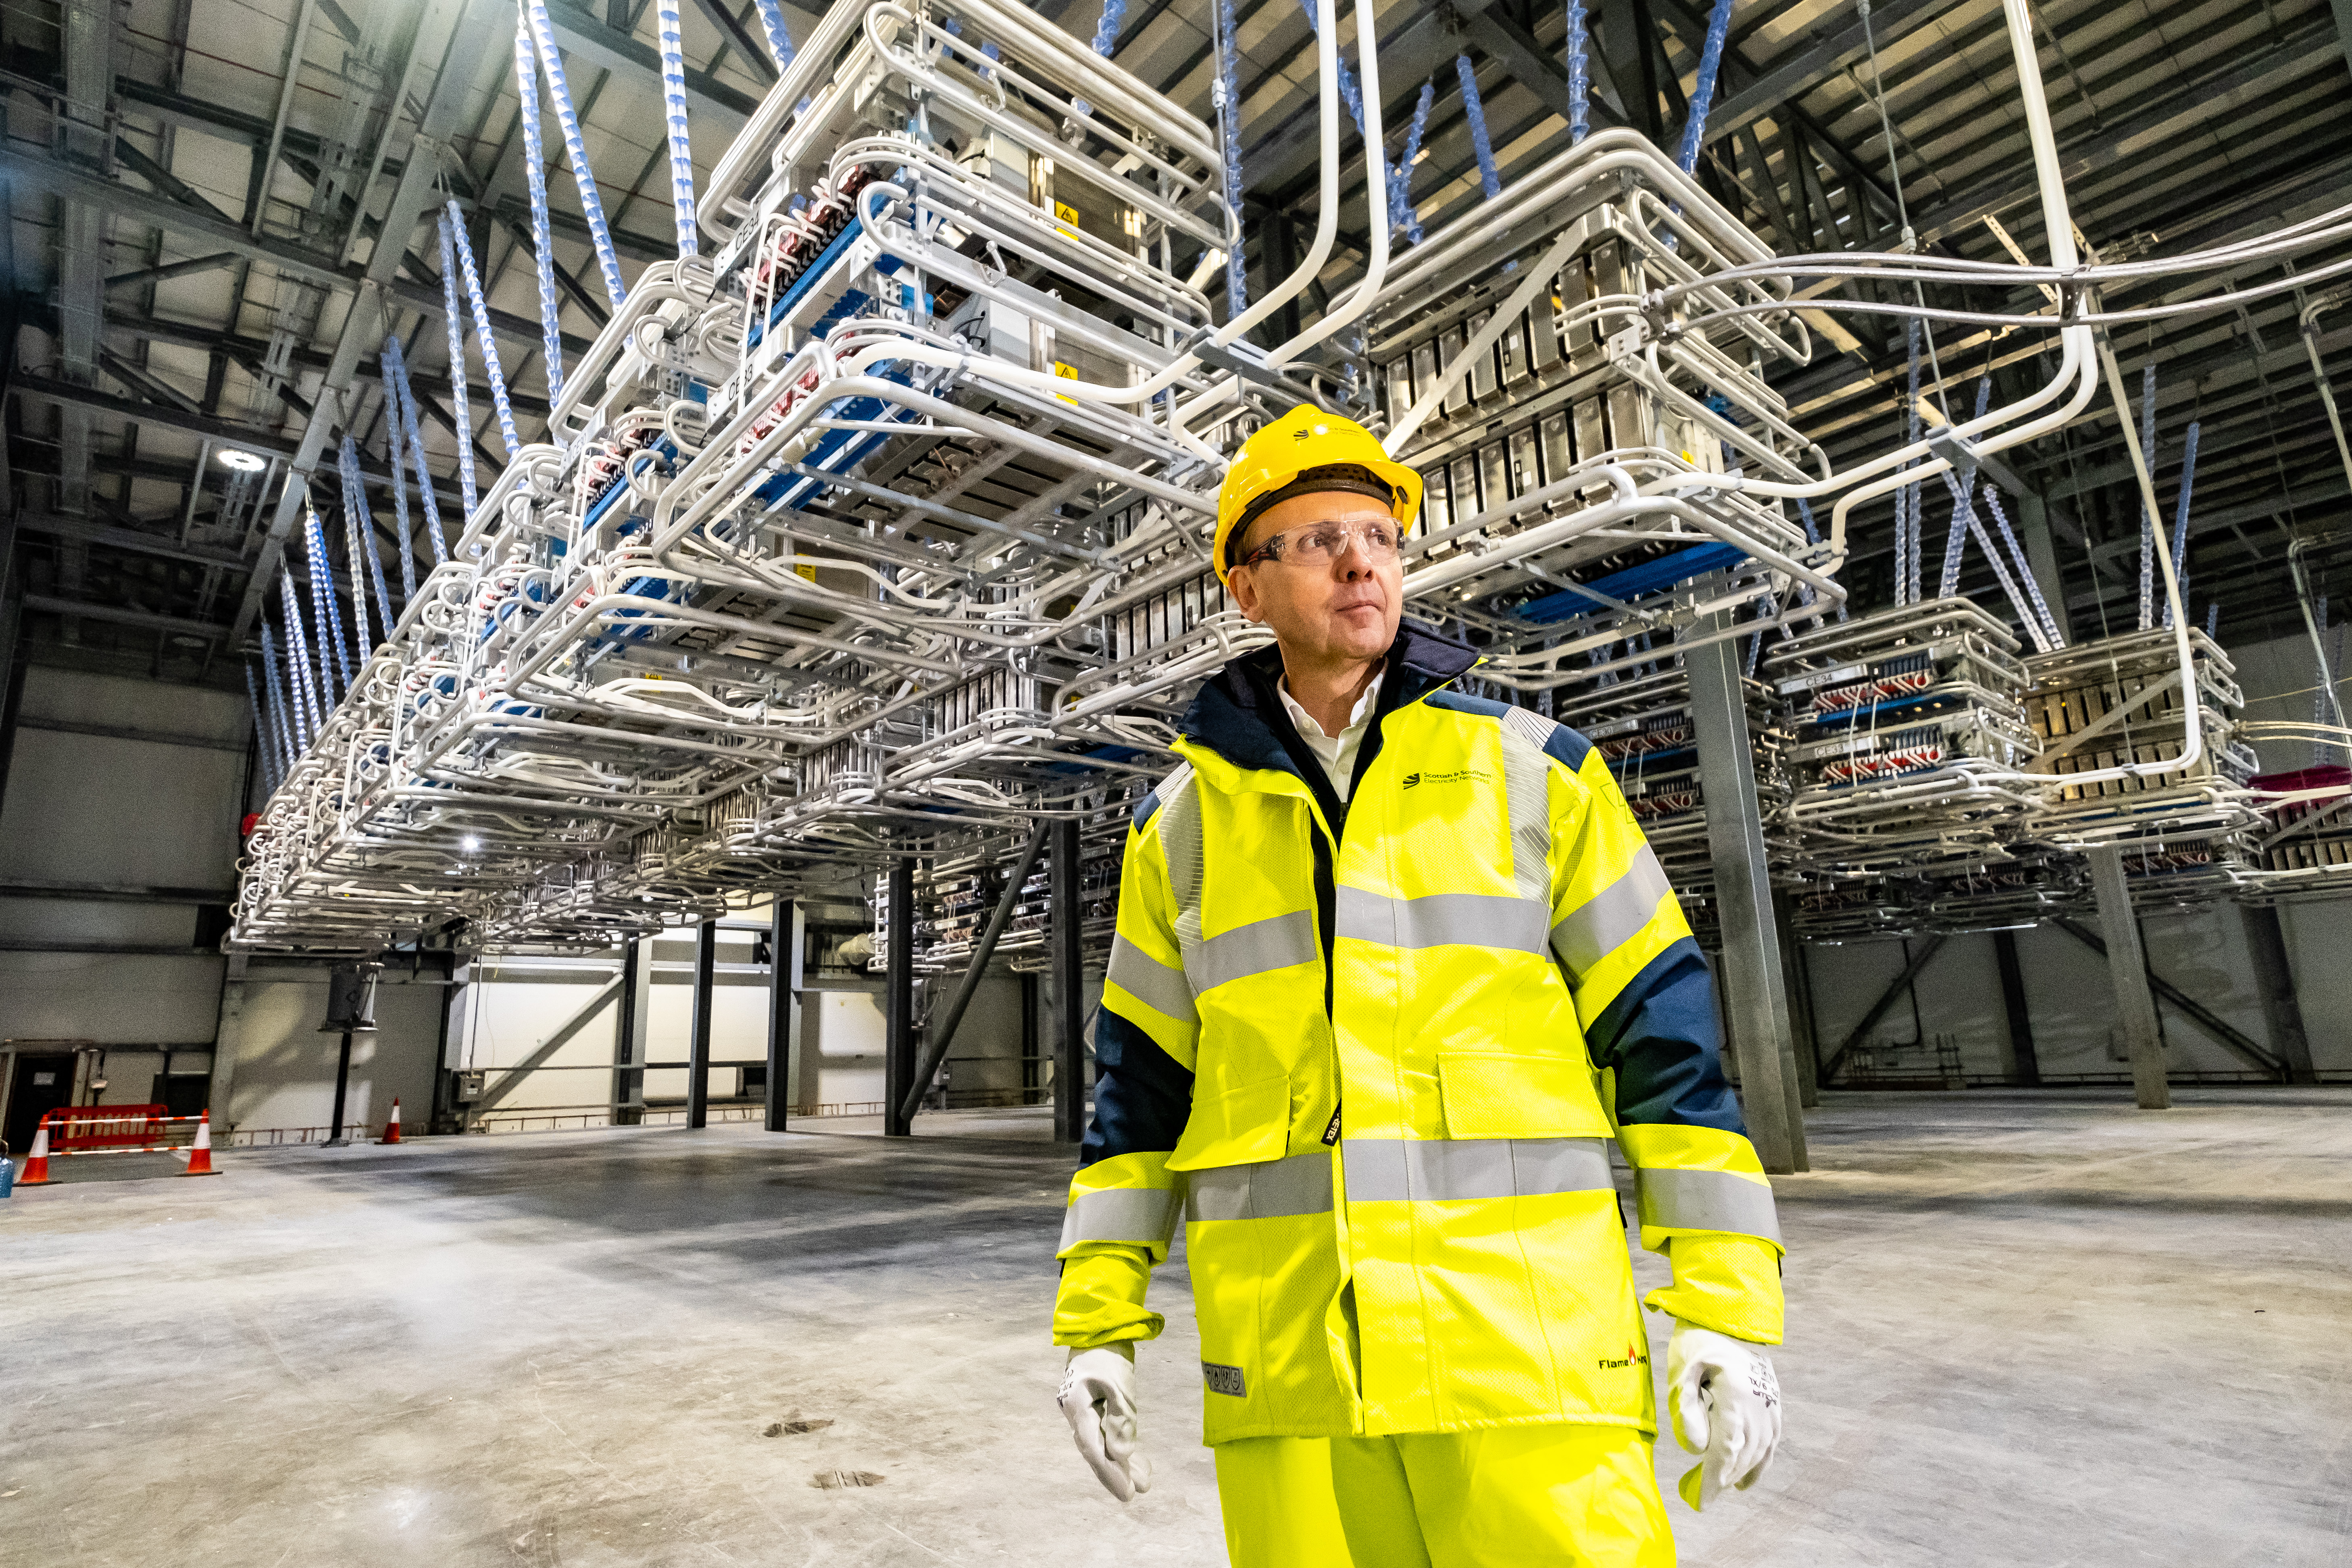 SSE chief executive Alistair Phillips-Davies at an SSE electricity transmission site